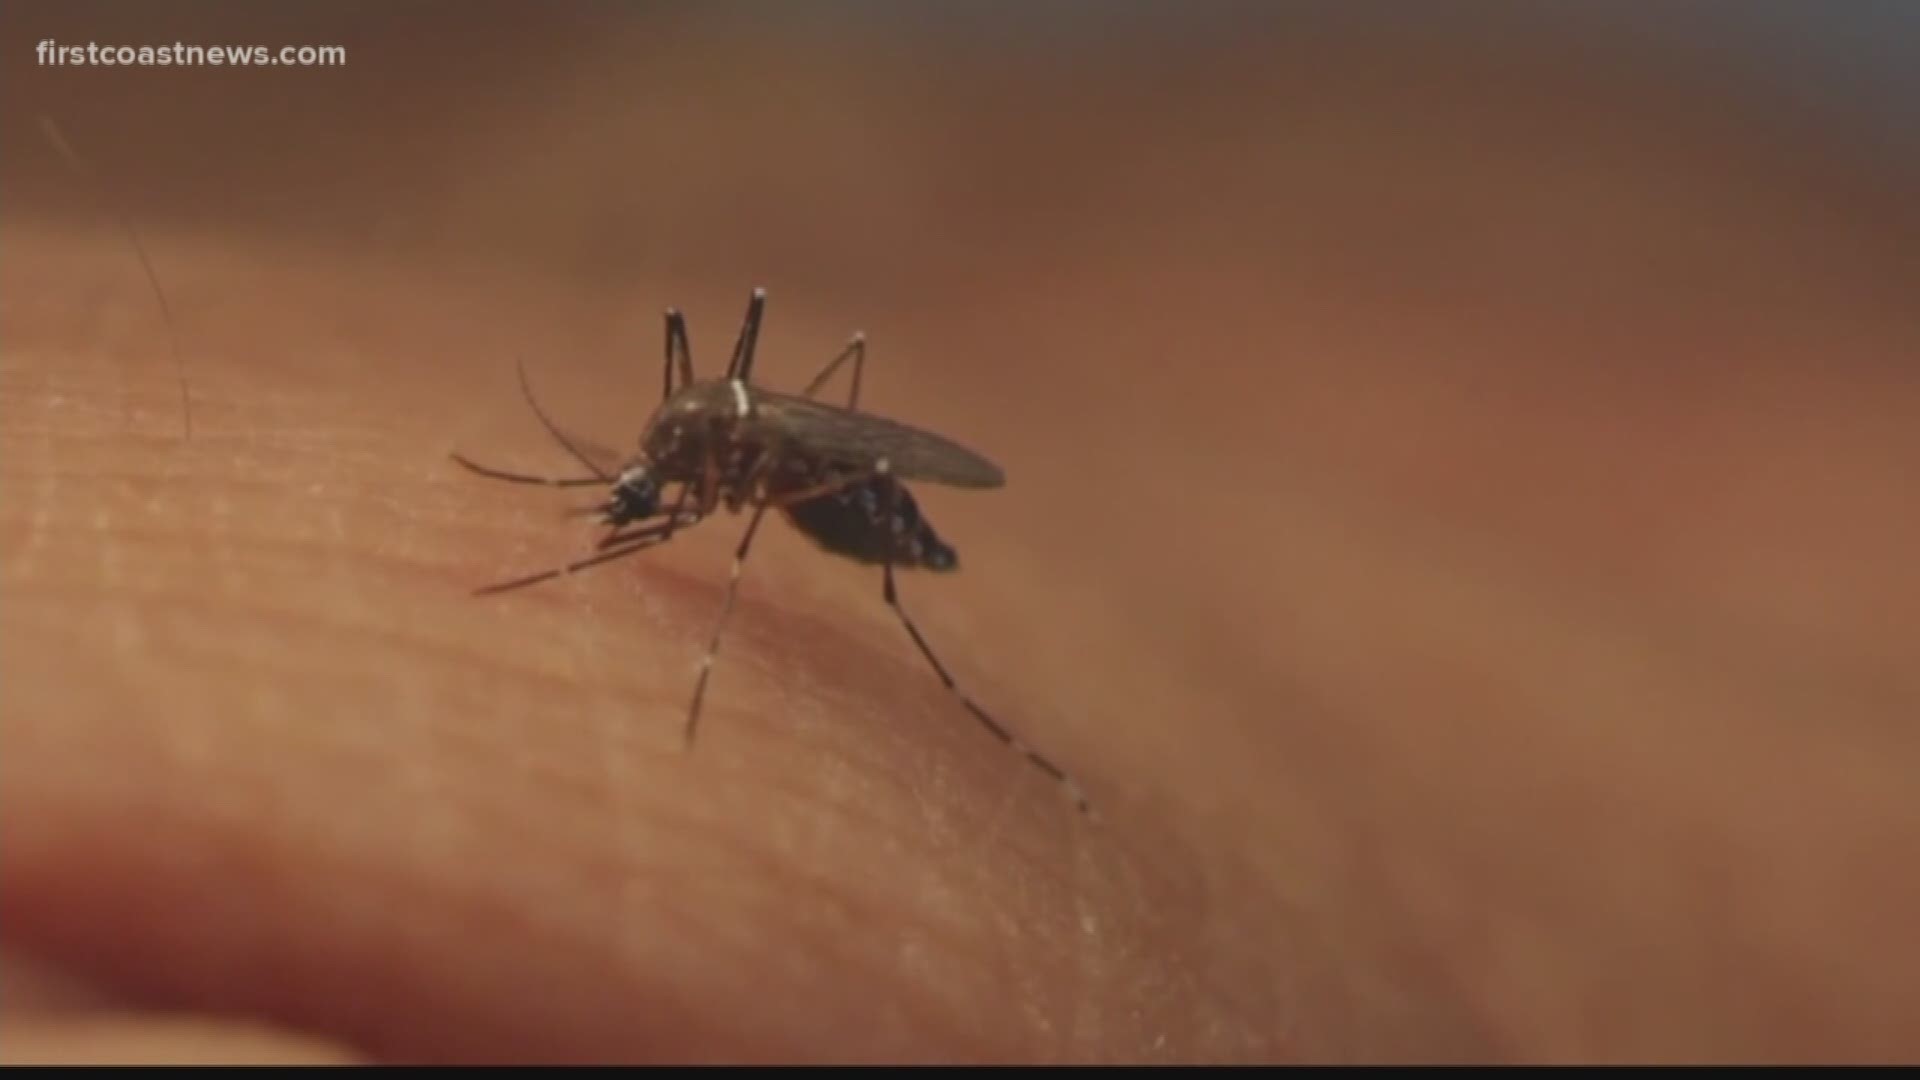 Officials have seen an increase in mosquito borne illness in recent samples from Putnam Co. chicken.